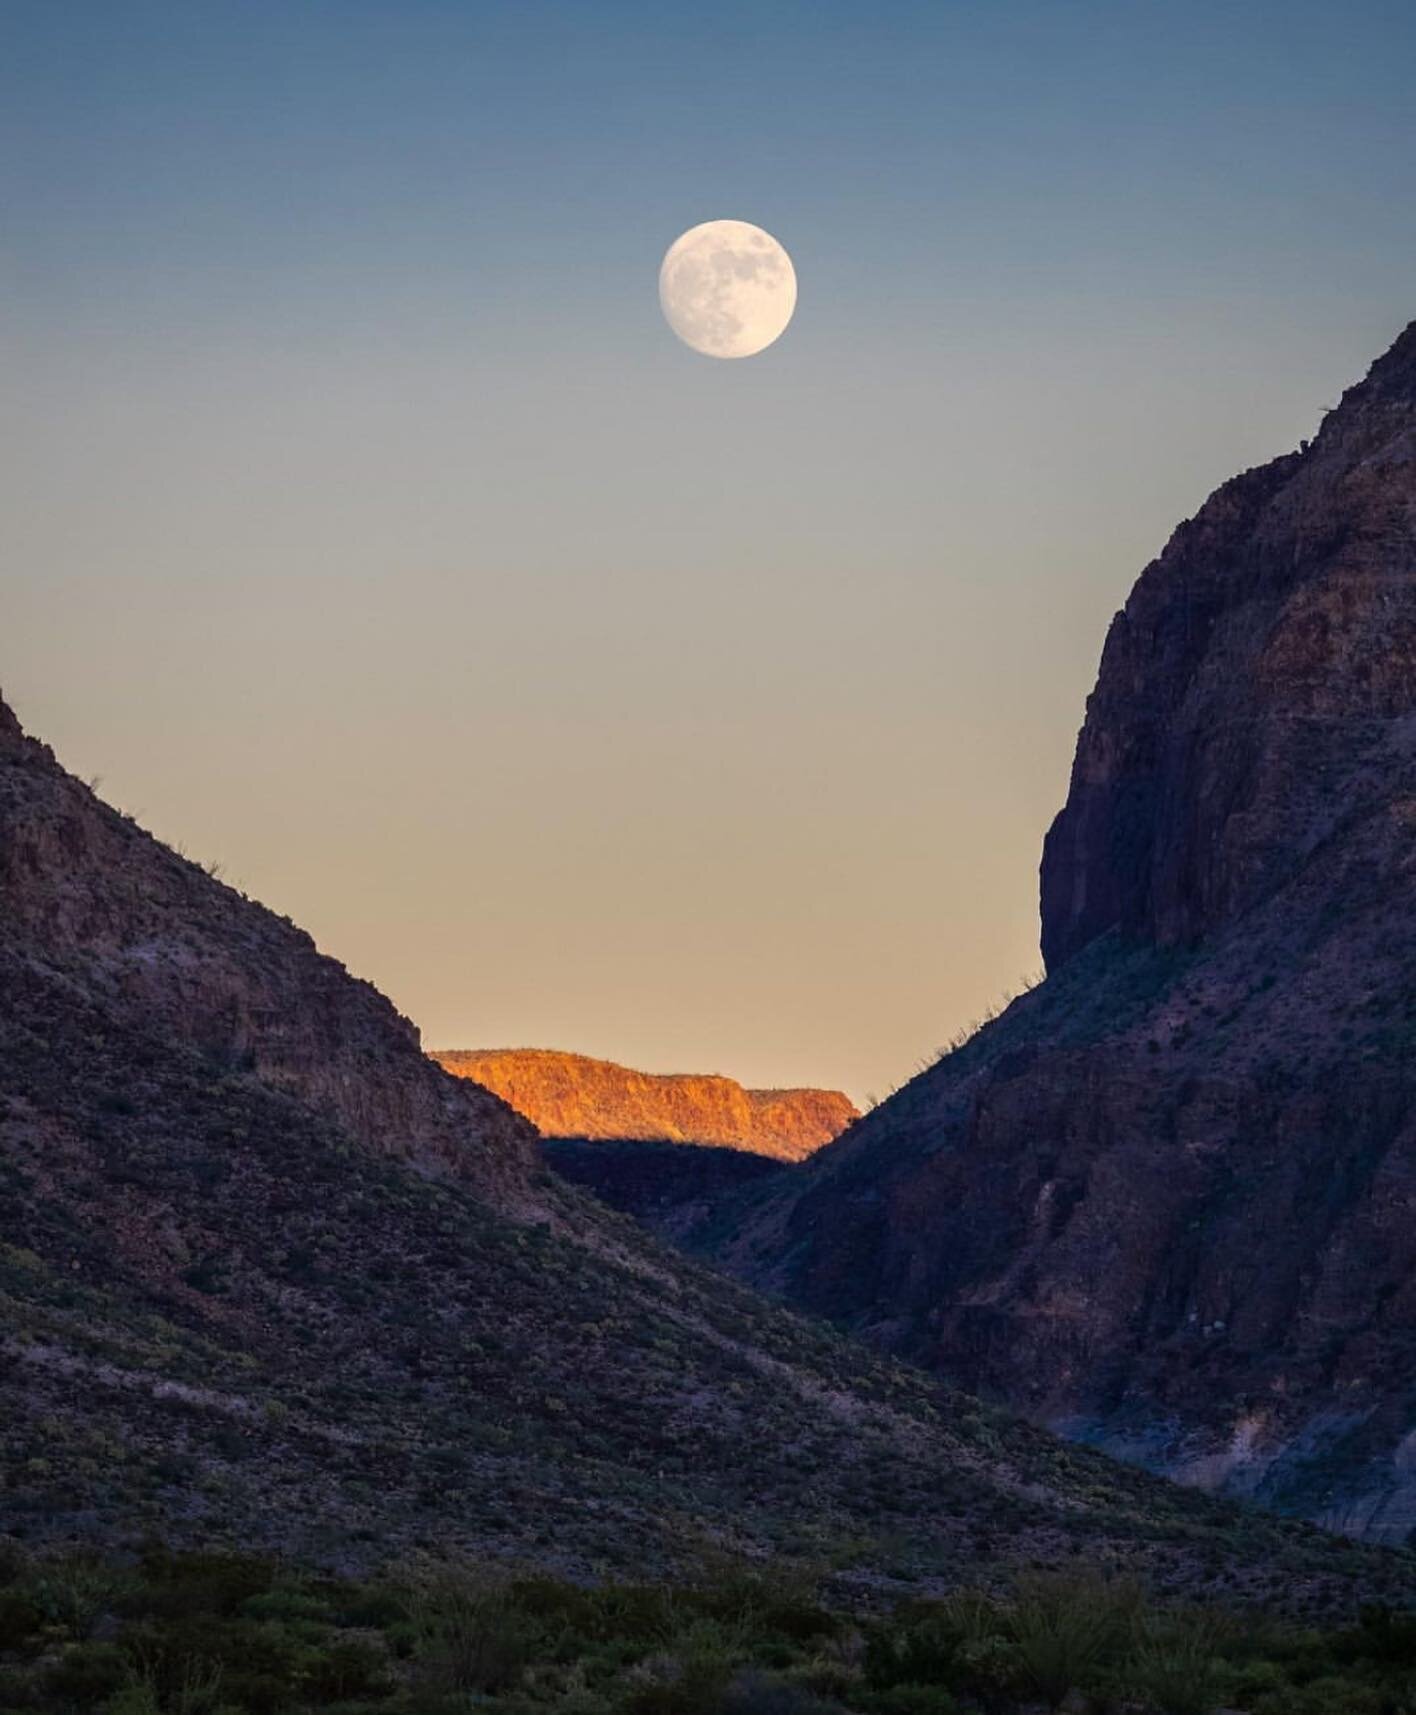 There are very few places in the world, let alone the United States, where one can see not only the stars... but also the moon in all its glory. The Big Bend is one of those places. We are very lucky to be surrounded by such majestic forces of nature